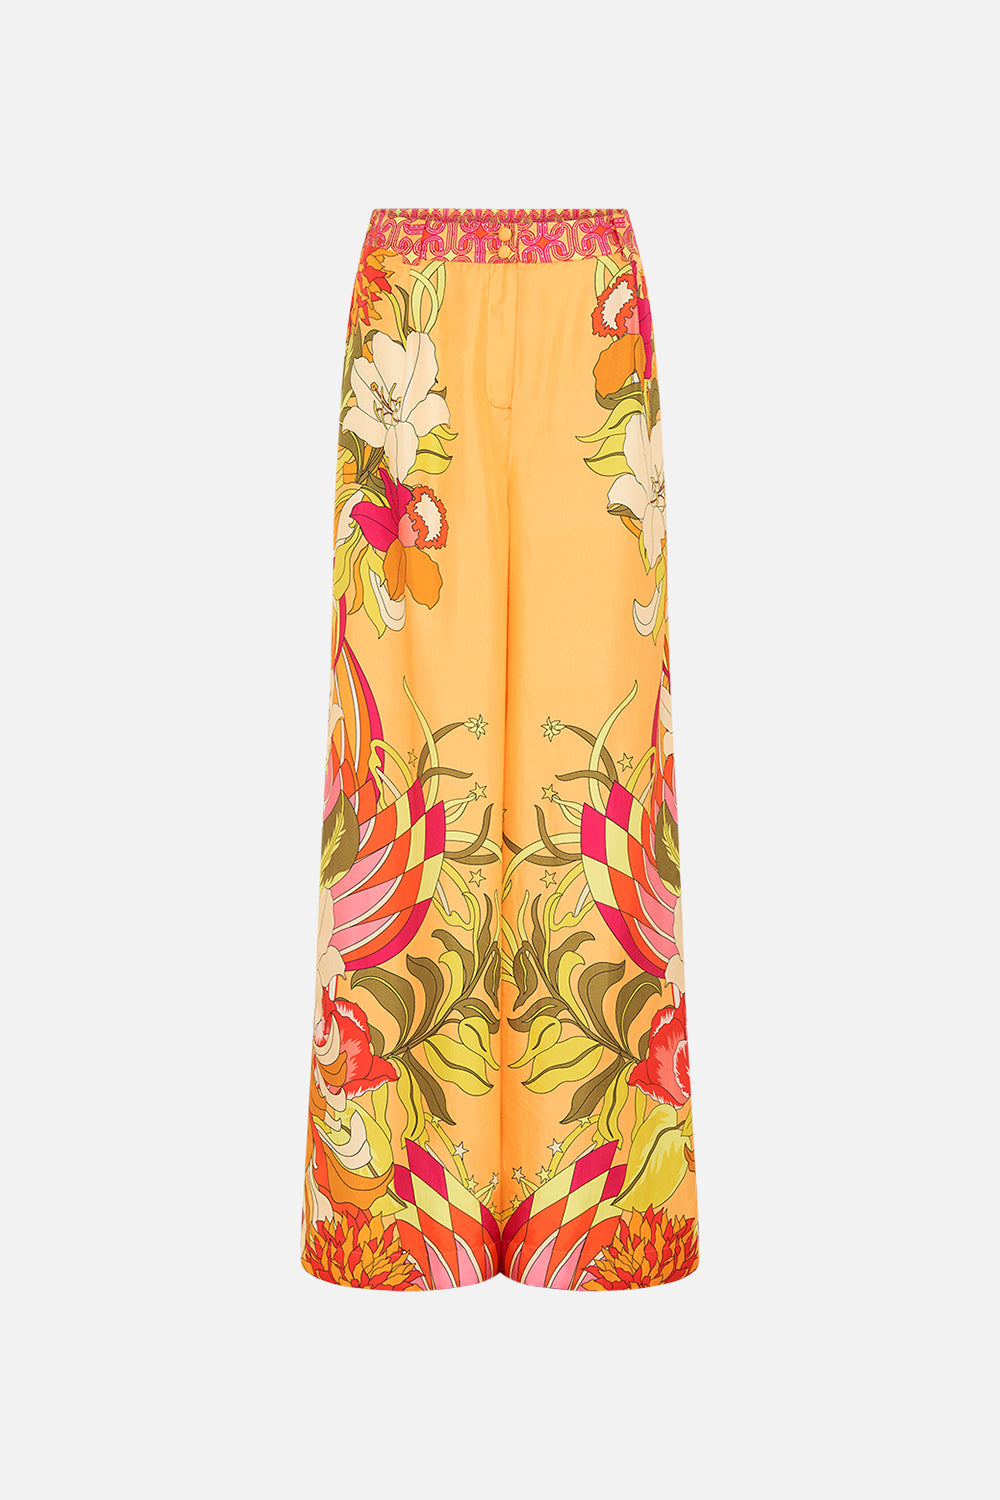 CAMILLA Floral Wide Leg Waisted Pant in The Flower Child Society print